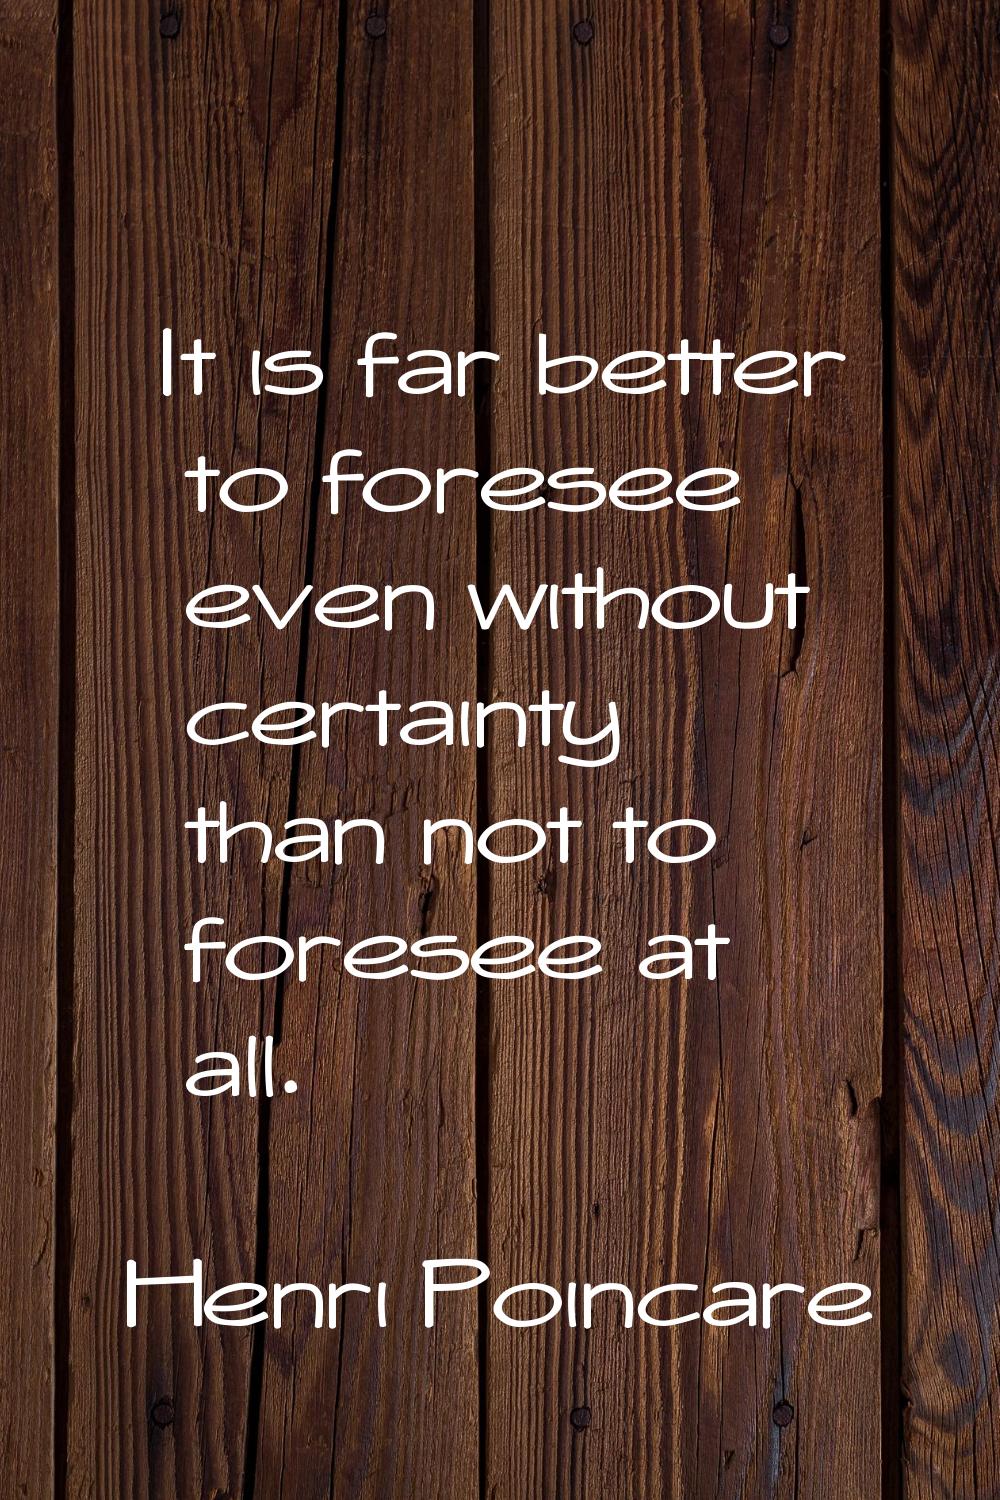 It is far better to foresee even without certainty than not to foresee at all.